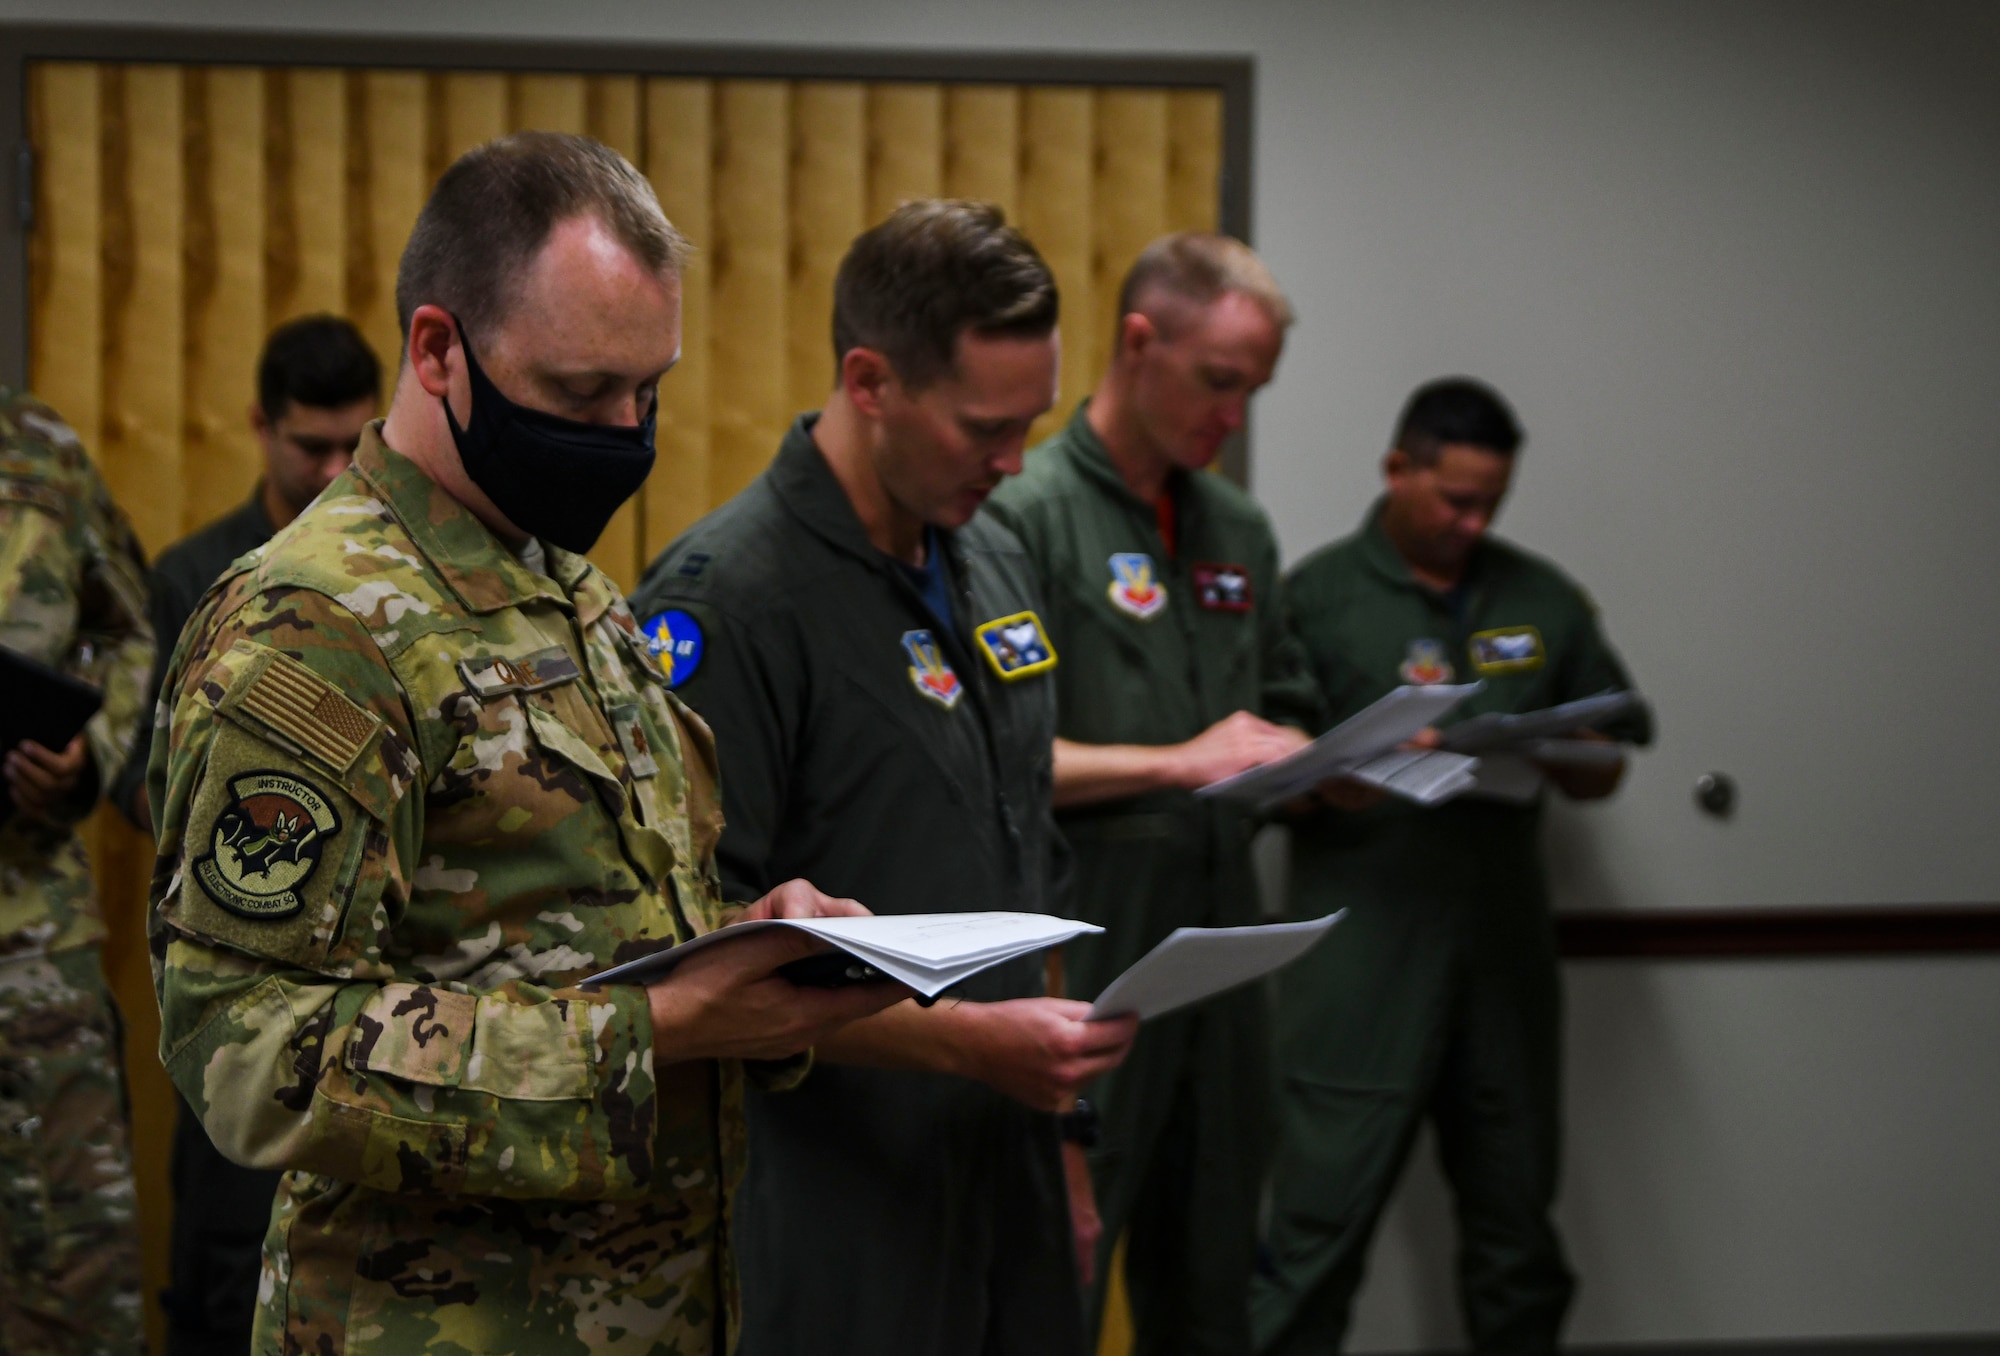 A photo of airmen holding bundles of paper